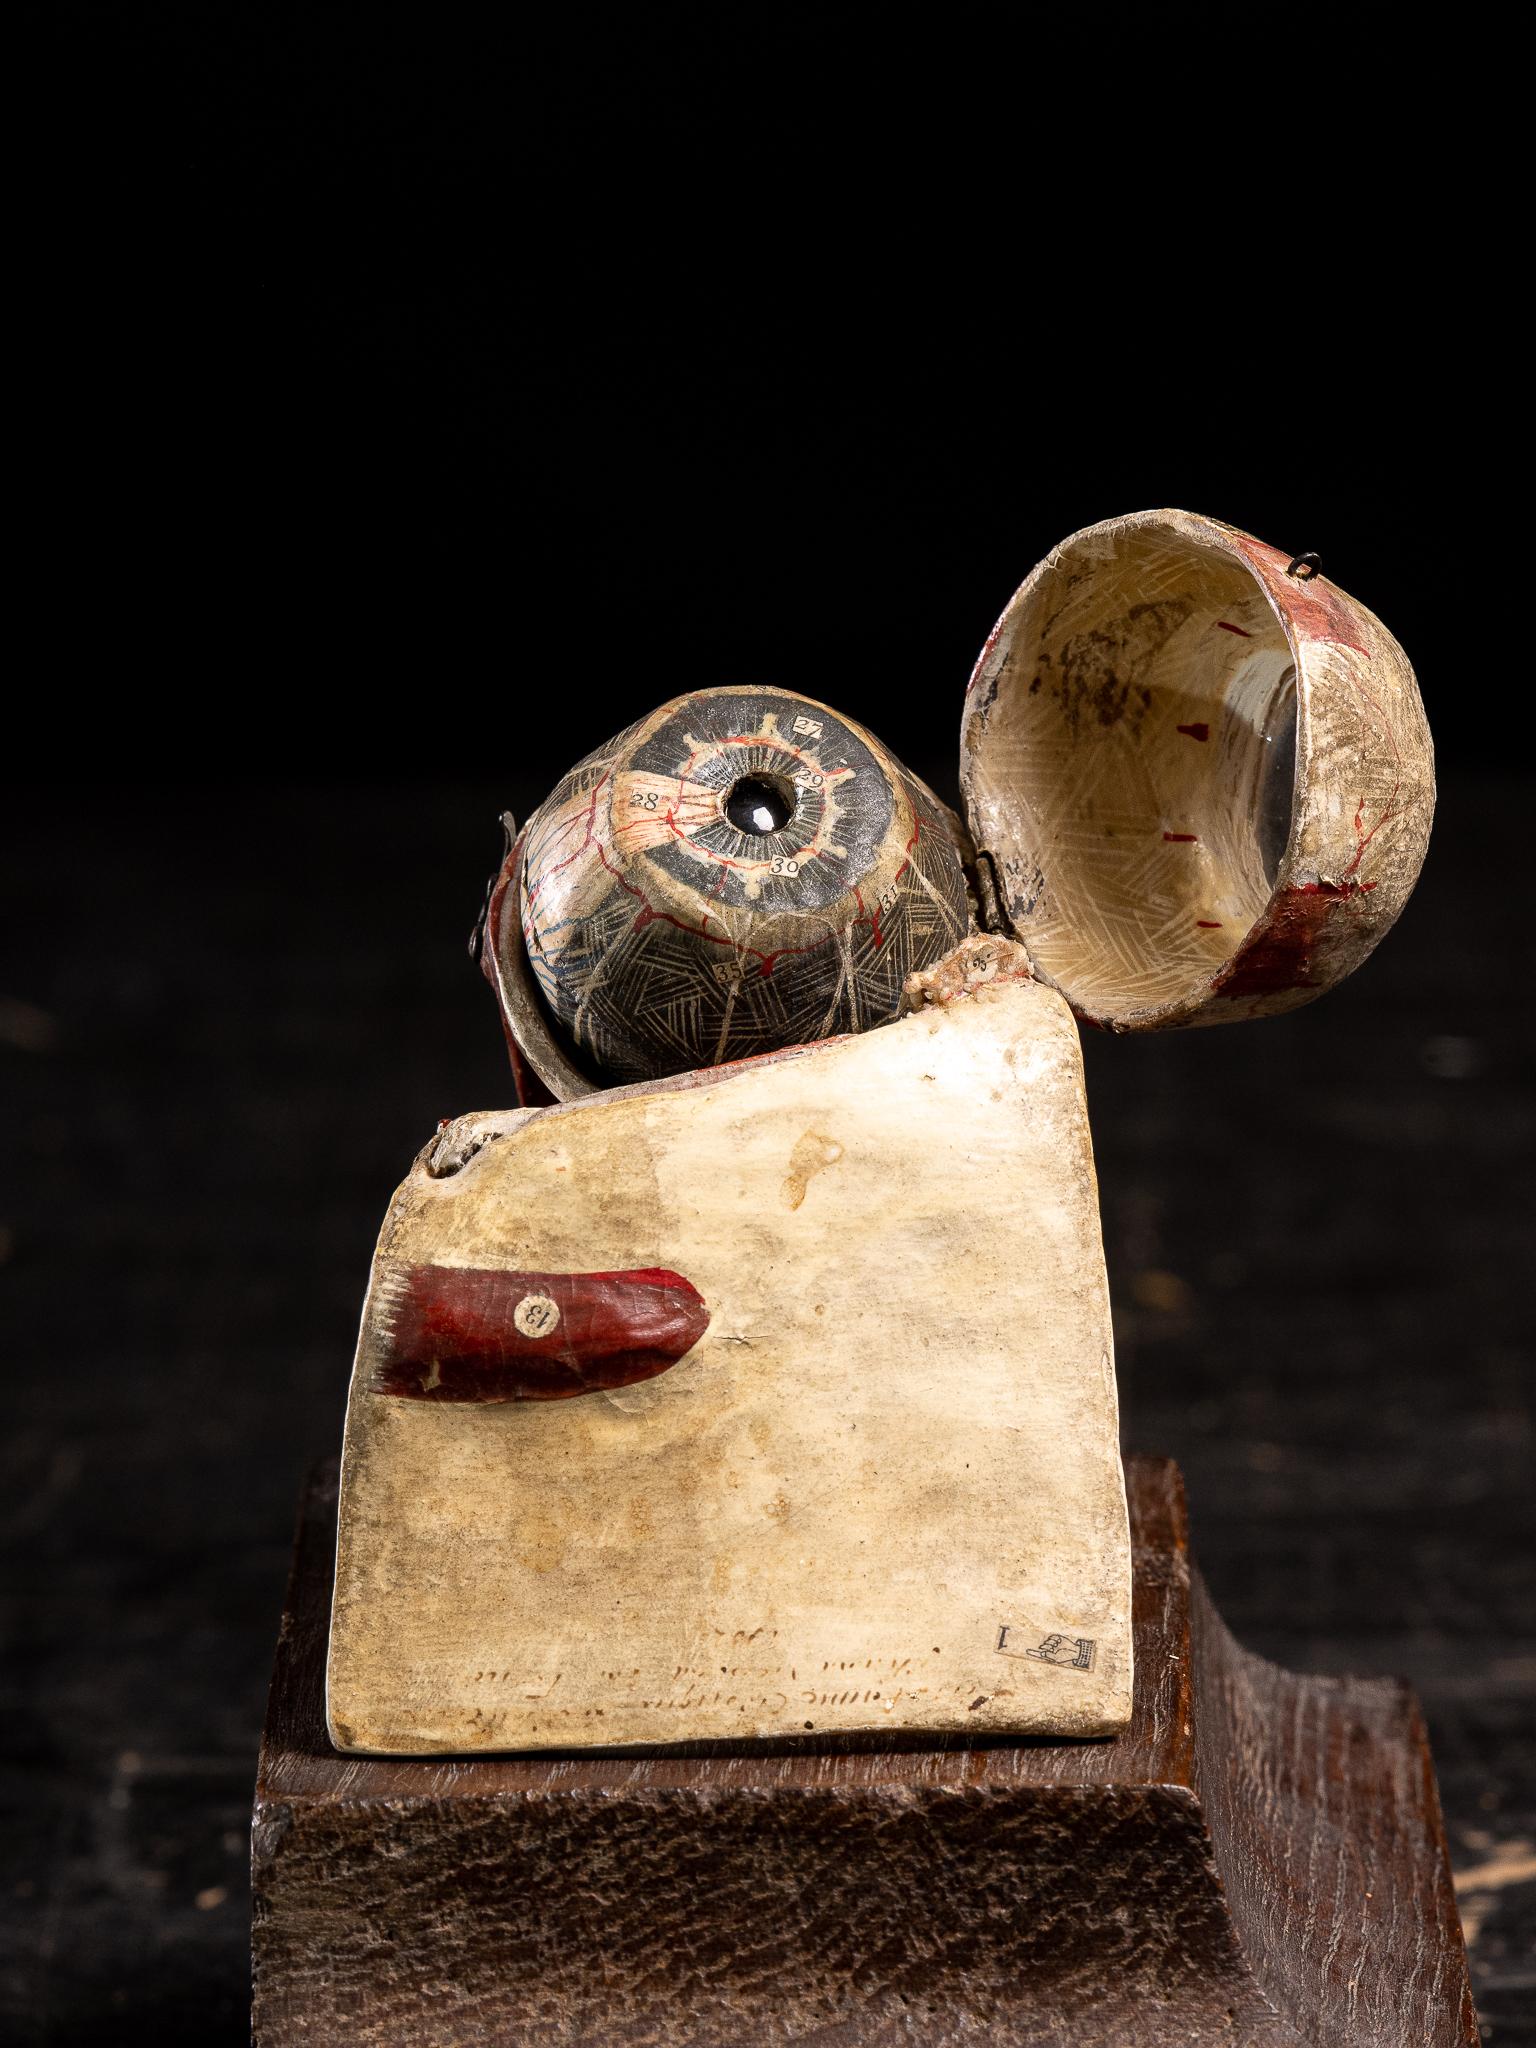 Anatomical cut of one eye, composition in natural painted papier-maché, with numbered labels on the different elements / the opening eyeball to cover the removable pute. Pen annotation 